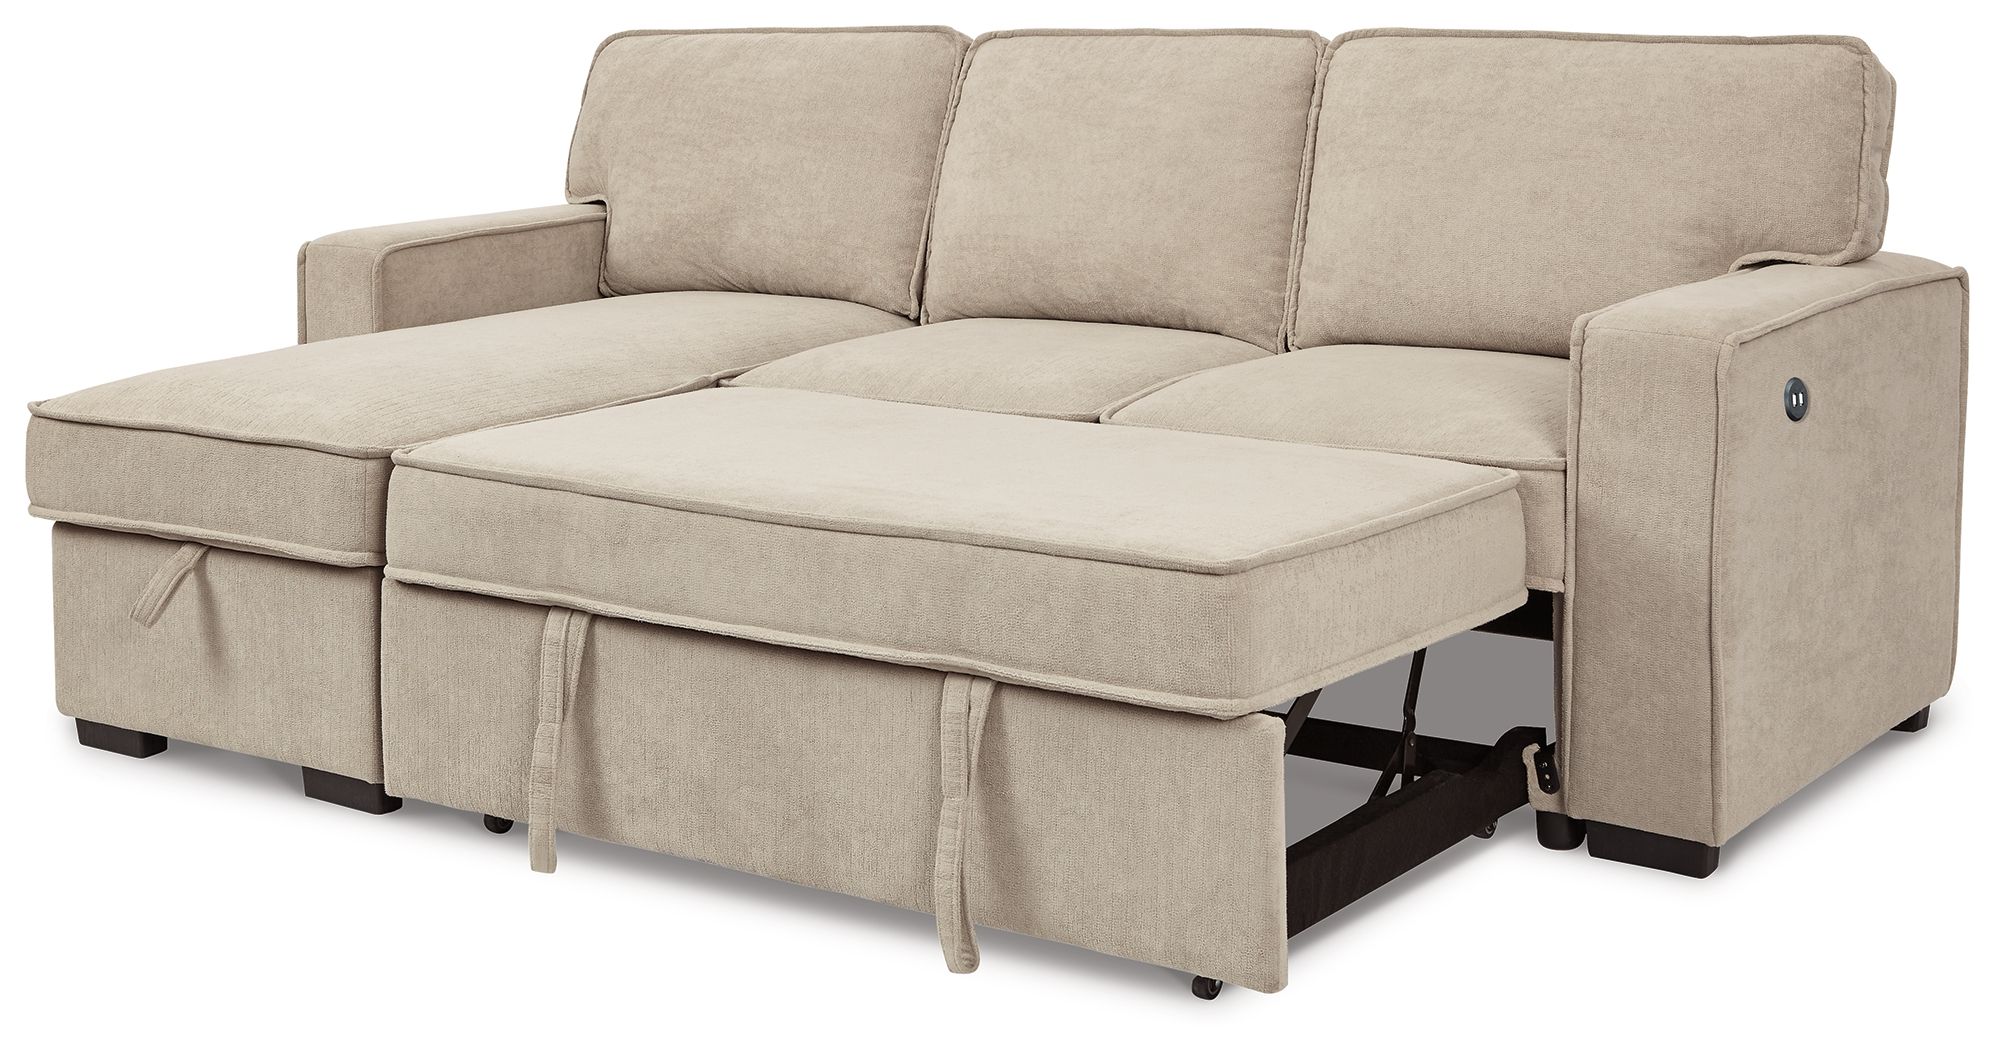 Darton 2 Piece Sleeper Sectional With Storage 73506s1signature Regarding Left Or Right Facing Sleeper Sectionals (Gallery 5 of 21)